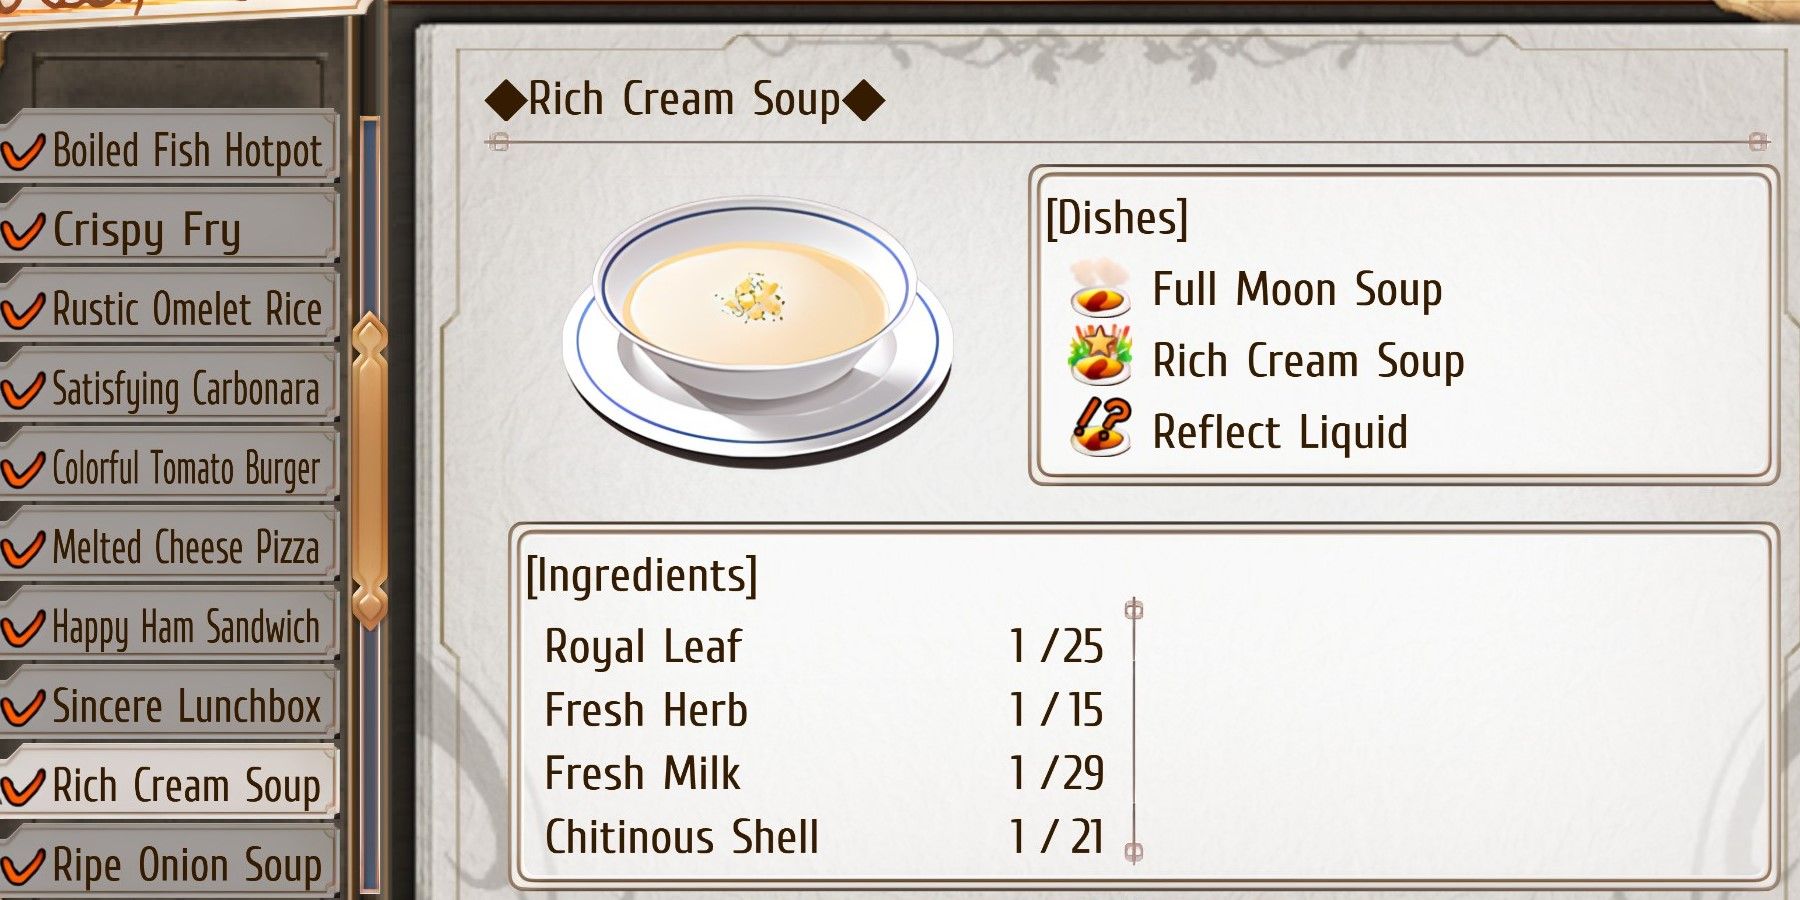 Rich Cream Soup recipe and ingredient list